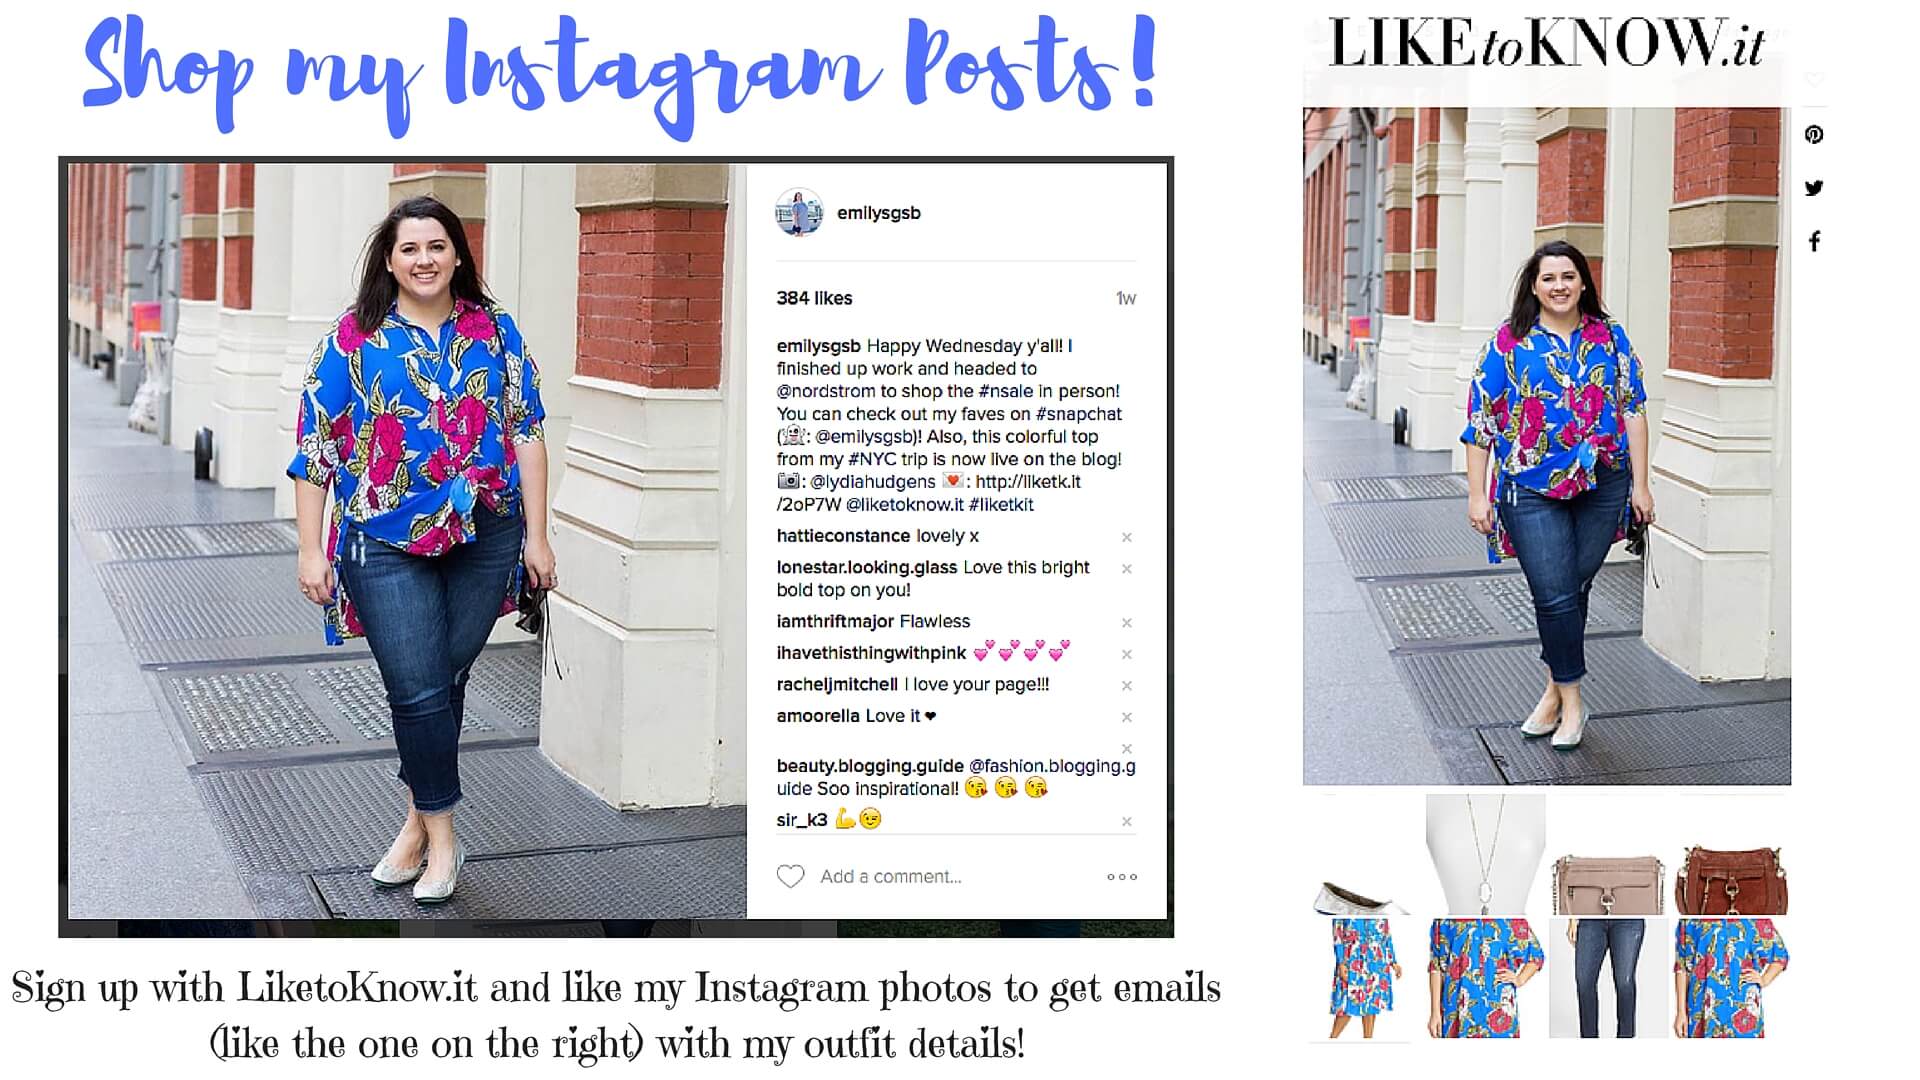 Shop my Instagram posts by signing up with LiketoKnow.it!